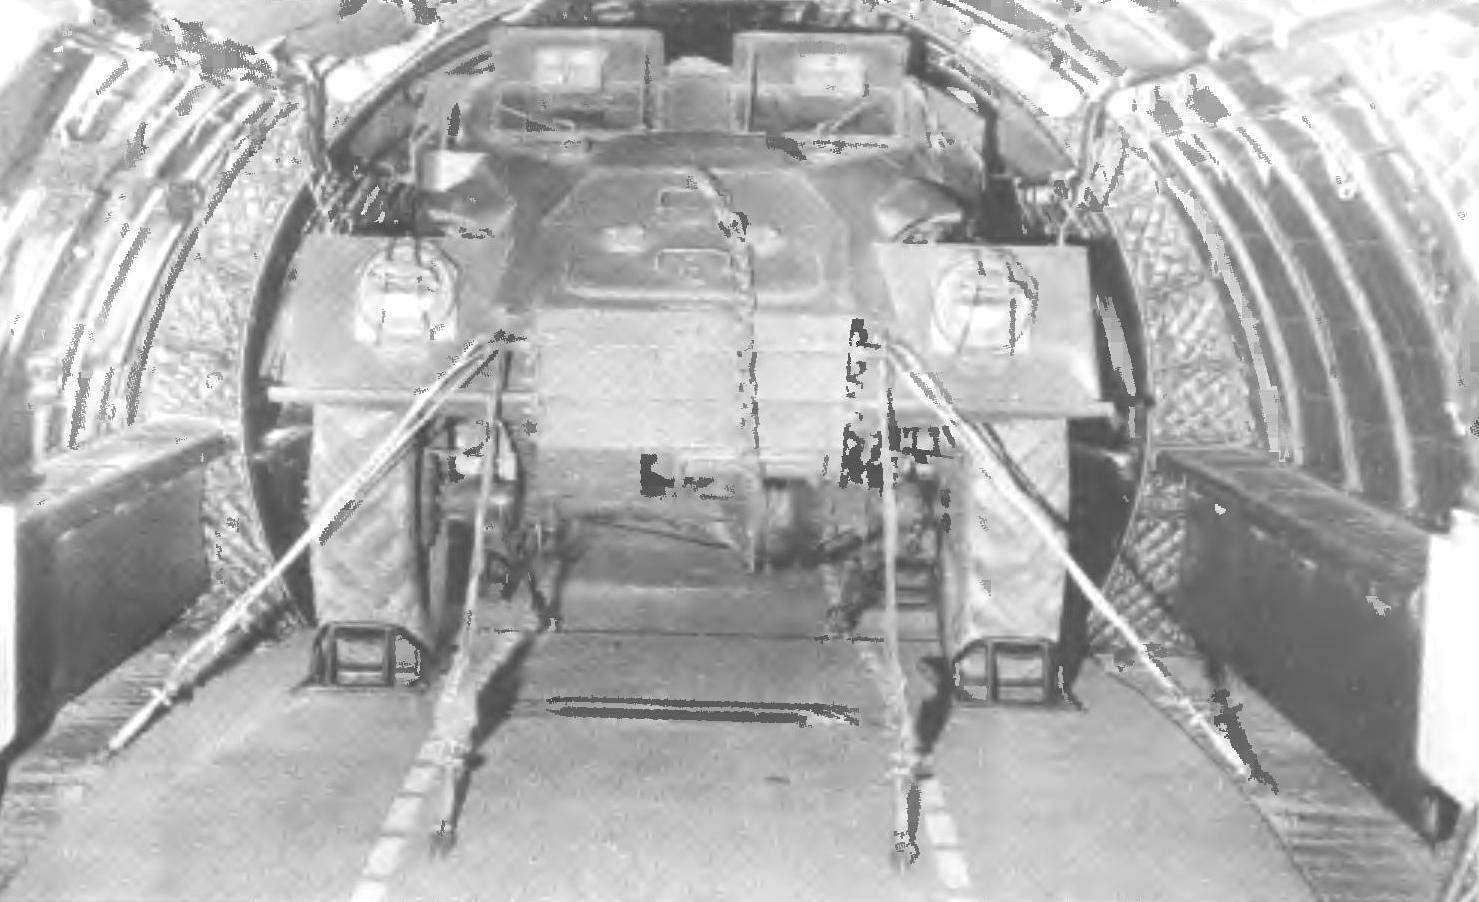 The location of the BTR-40 in the cargo compartment of the Tu-107